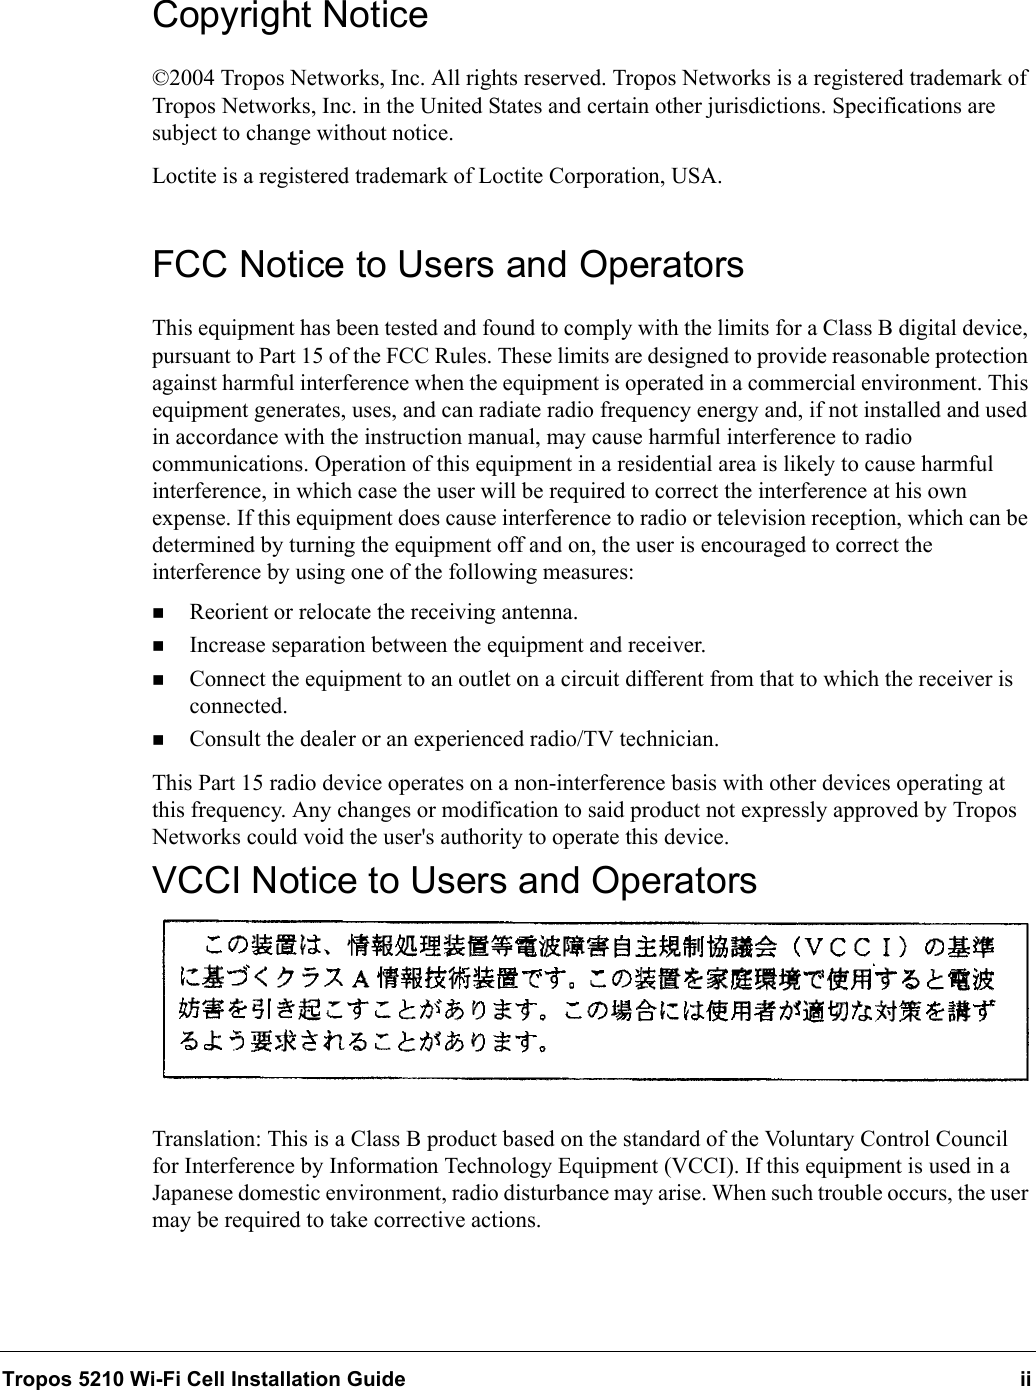 Tropos 5210 Wi-Fi Cell Installation Guide iiCopyright Notice©2004 Tropos Networks, Inc. All rights reserved. Tropos Networks is a registered trademark of Tropos Networks, Inc. in the United States and certain other jurisdictions. Specifications are subject to change without notice.Loctite is a registered trademark of Loctite Corporation, USA.FCC Notice to Users and OperatorsThis equipment has been tested and found to comply with the limits for a Class B digital device, pursuant to Part 15 of the FCC Rules. These limits are designed to provide reasonable protection against harmful interference when the equipment is operated in a commercial environment. This equipment generates, uses, and can radiate radio frequency energy and, if not installed and used in accordance with the instruction manual, may cause harmful interference to radio communications. Operation of this equipment in a residential area is likely to cause harmful interference, in which case the user will be required to correct the interference at his own expense. If this equipment does cause interference to radio or television reception, which can be determined by turning the equipment off and on, the user is encouraged to correct the interference by using one of the following measures:Reorient or relocate the receiving antenna. Increase separation between the equipment and receiver. Connect the equipment to an outlet on a circuit different from that to which the receiver is connected. Consult the dealer or an experienced radio/TV technician.This Part 15 radio device operates on a non-interference basis with other devices operating at this frequency. Any changes or modification to said product not expressly approved by Tropos Networks could void the user&apos;s authority to operate this device.VCCI Notice to Users and OperatorsTranslation: This is a Class B product based on the standard of the Voluntary Control Council for Interference by Information Technology Equipment (VCCI). If this equipment is used in a Japanese domestic environment, radio disturbance may arise. When such trouble occurs, the user may be required to take corrective actions.